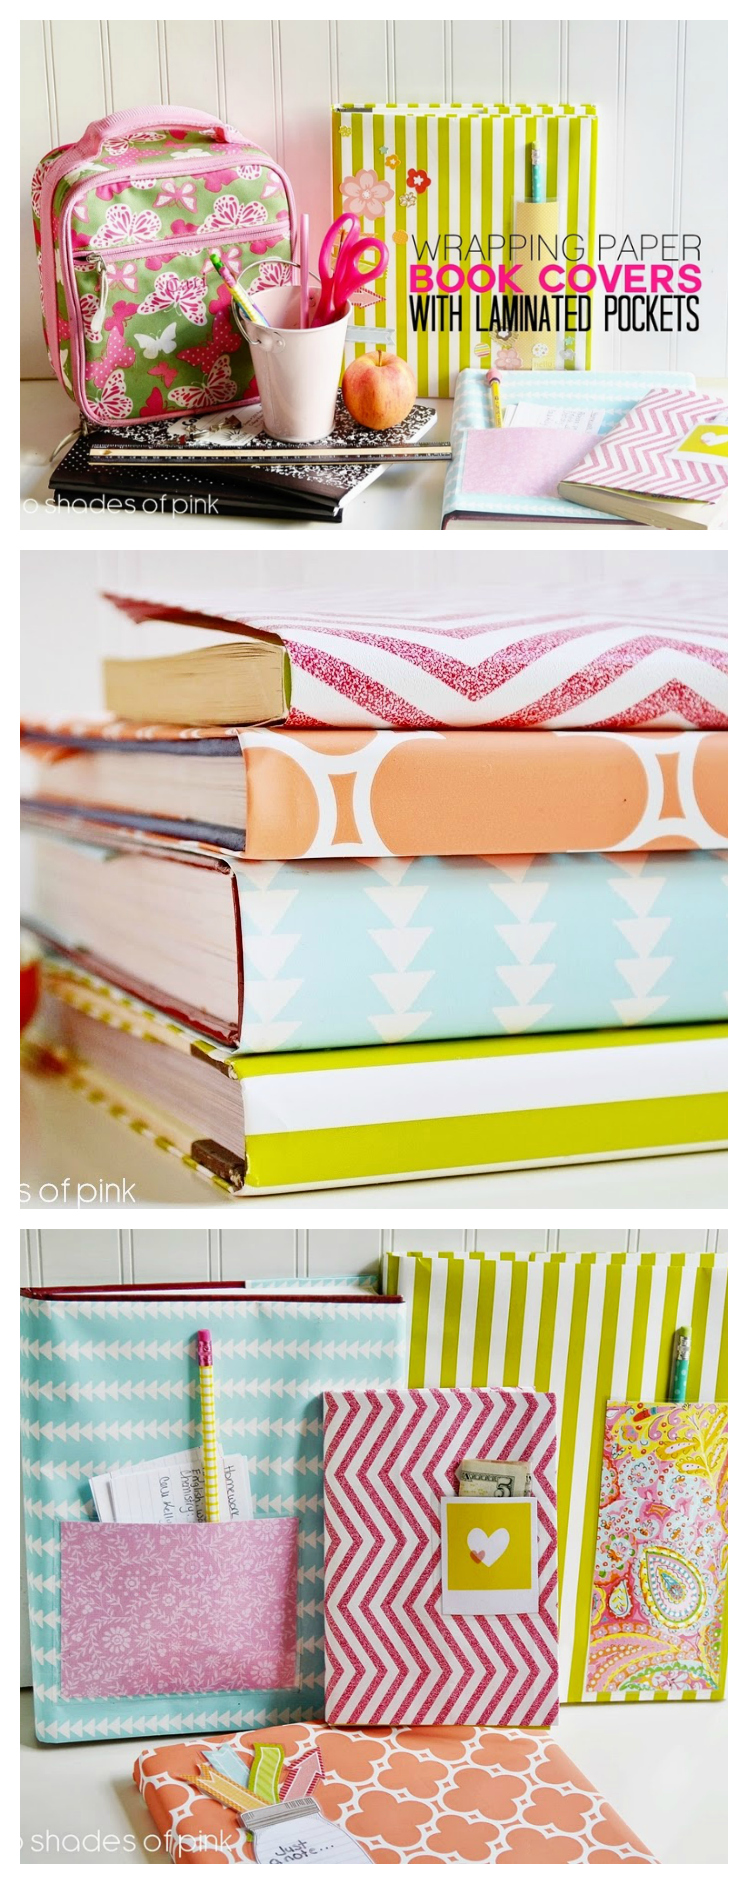 DIY Wrapping Paper Book Covers